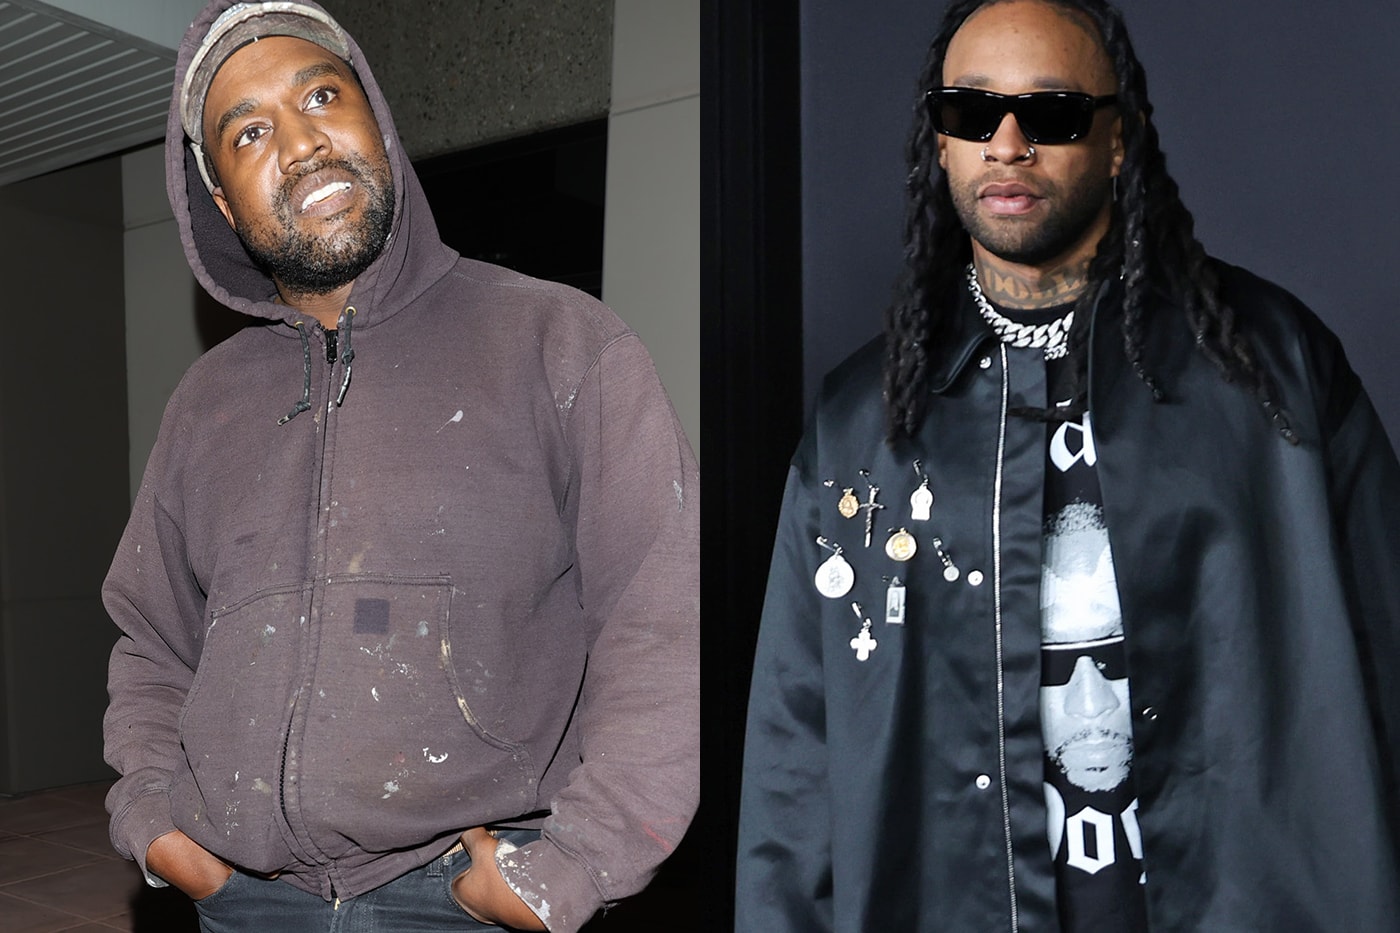 Ty Dolla $ign & Kanye West to hold listening events for joint album